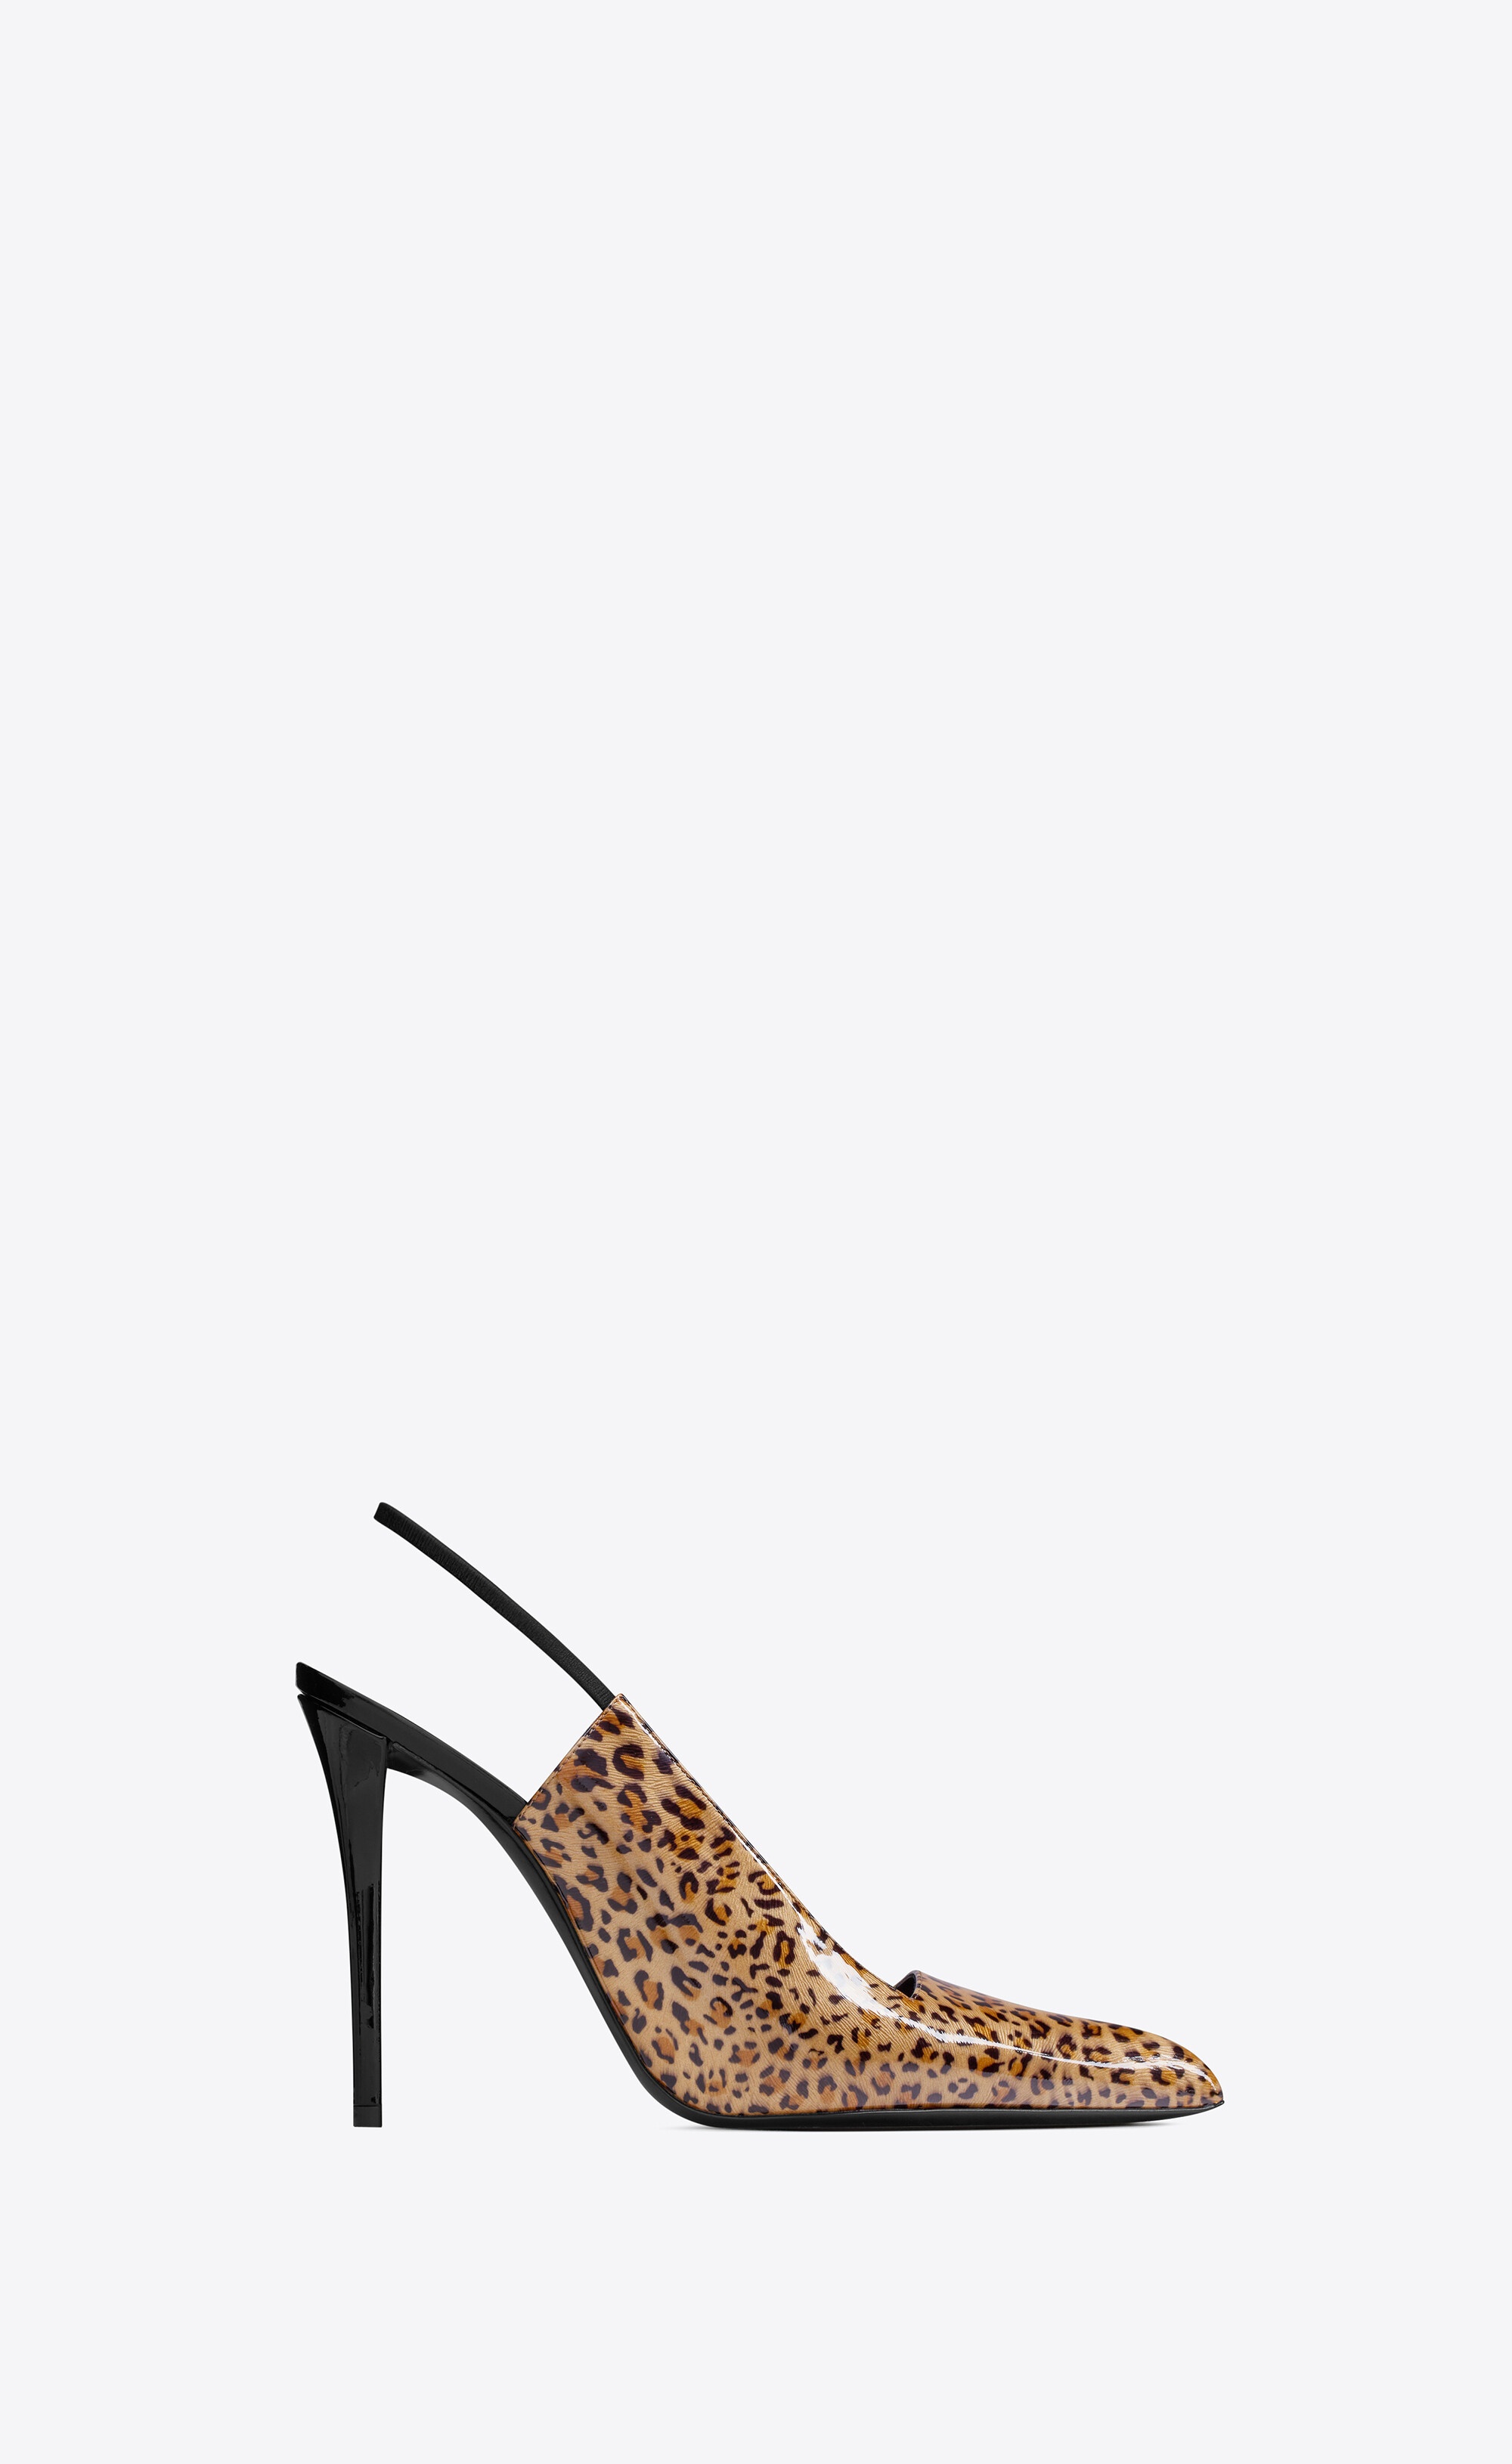 raven slingback pumps in leopard-print patent leather - 1